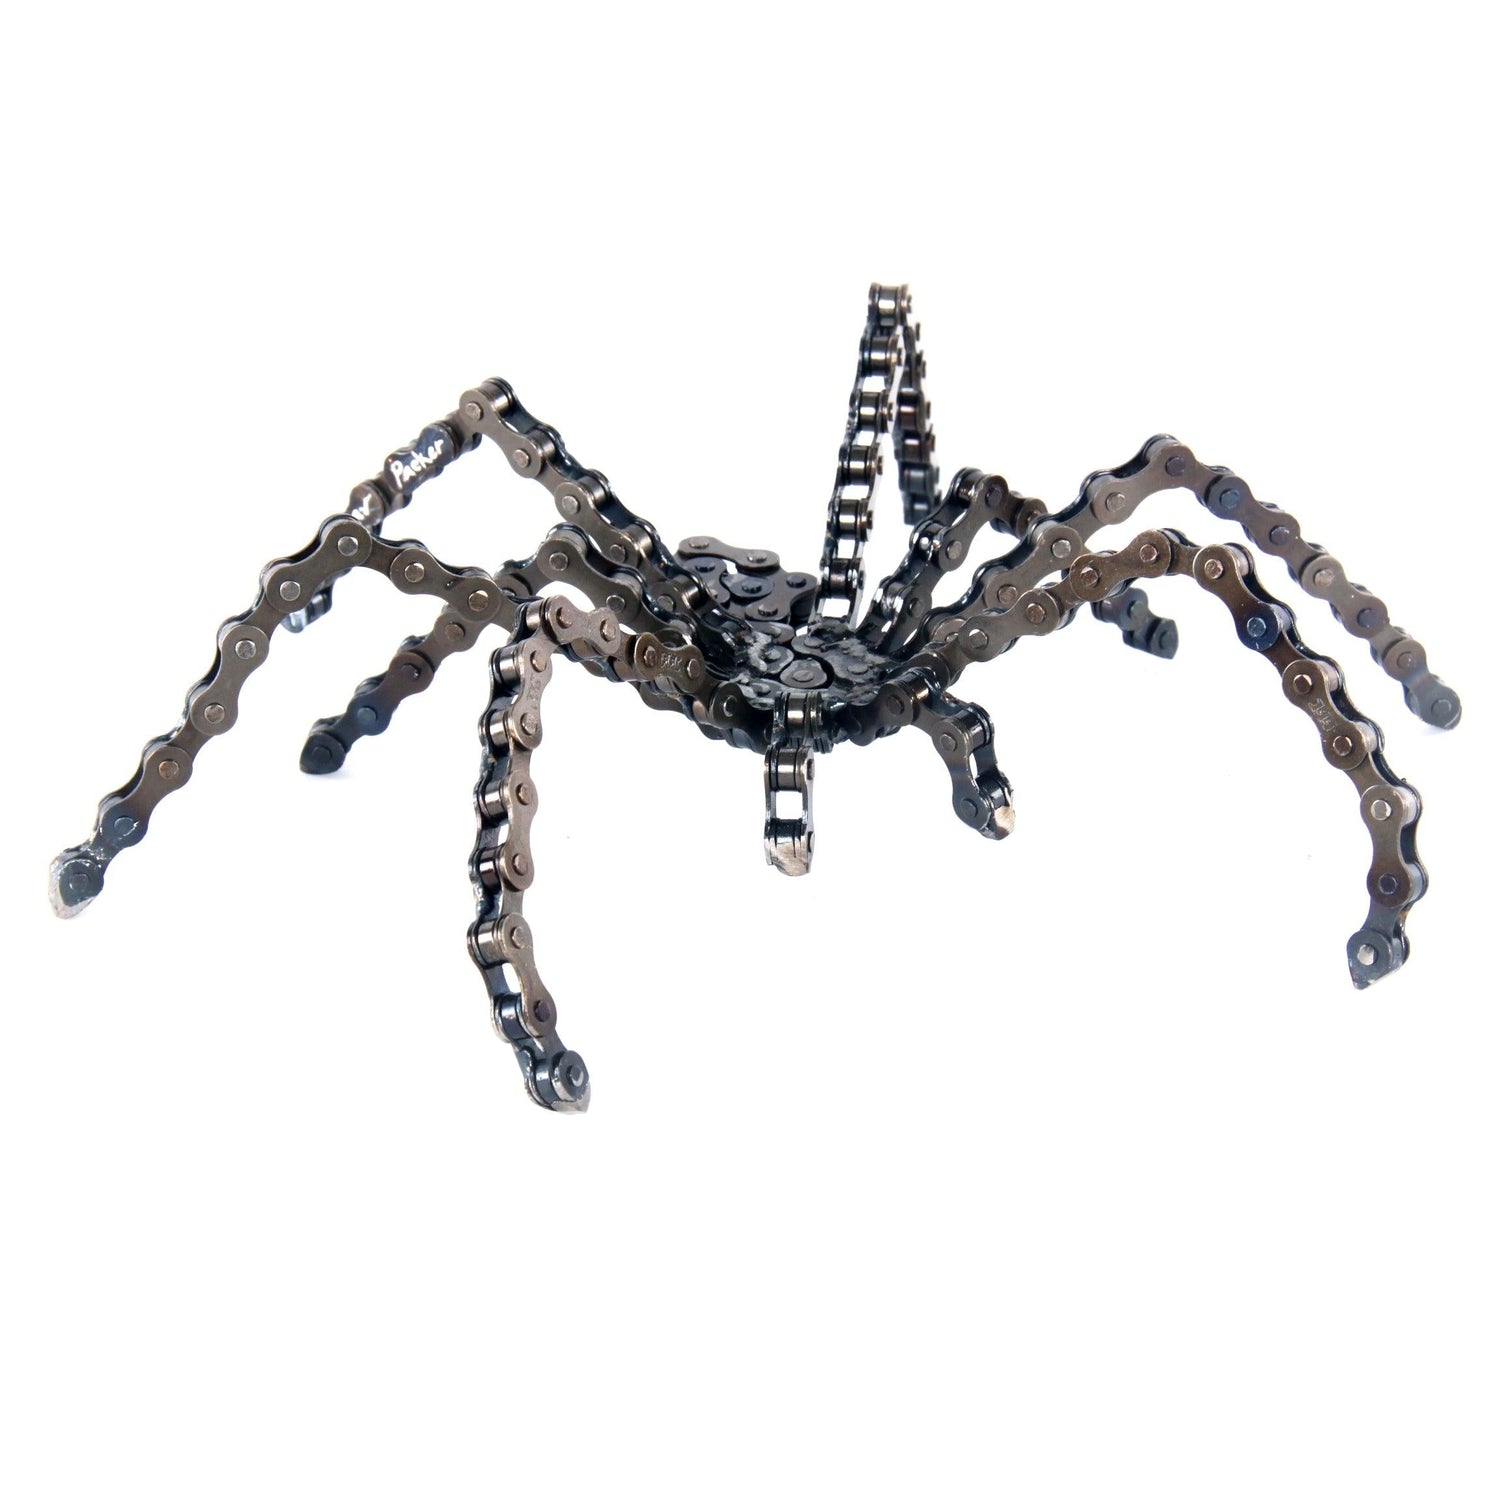 Spider Sculpture | UNCHAINED by NIRIT LEVAV PACKER